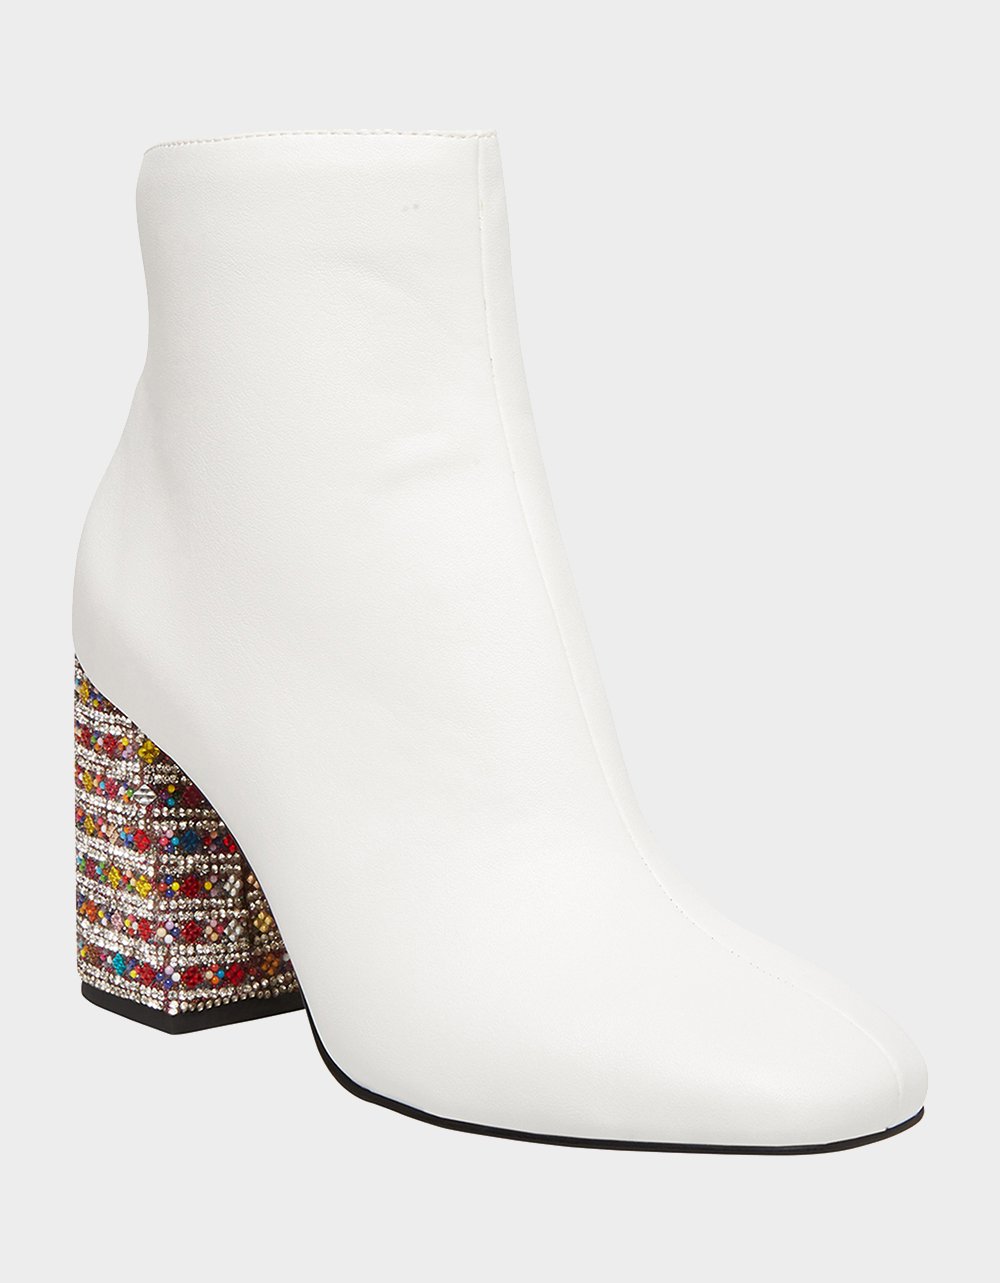 A while leather boot with a rainbow sparkling heel.